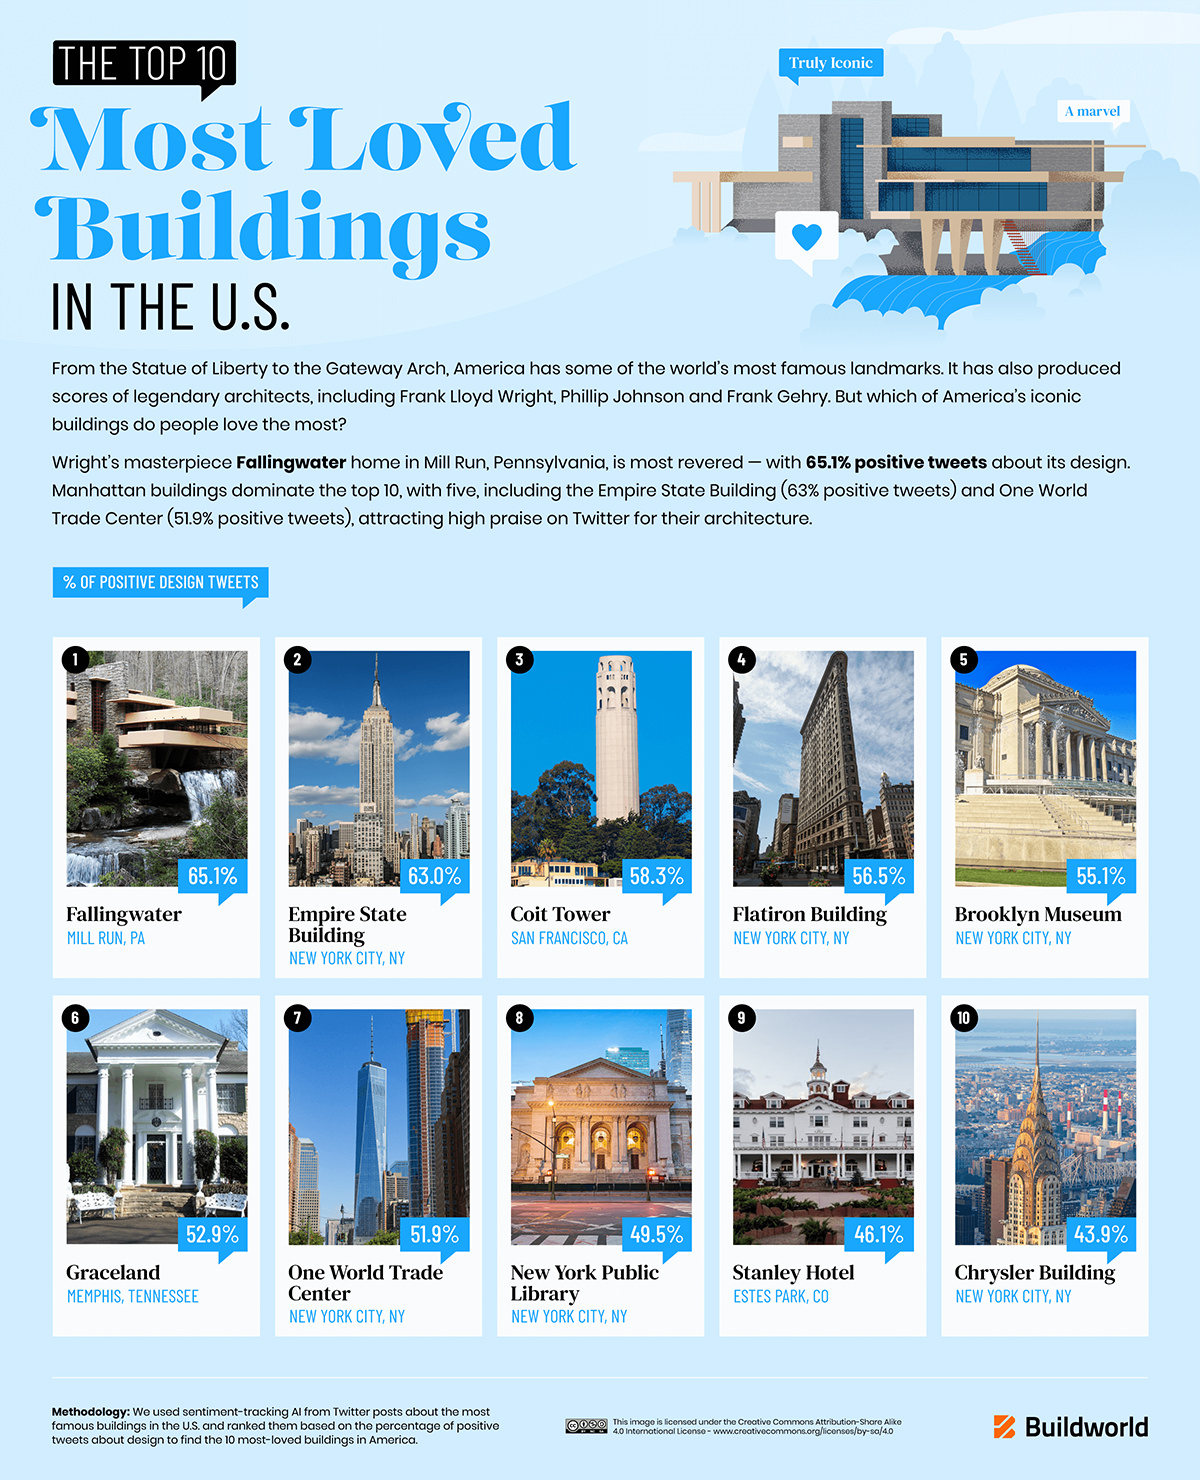 The Top 10 Most Loved Buildings in the US